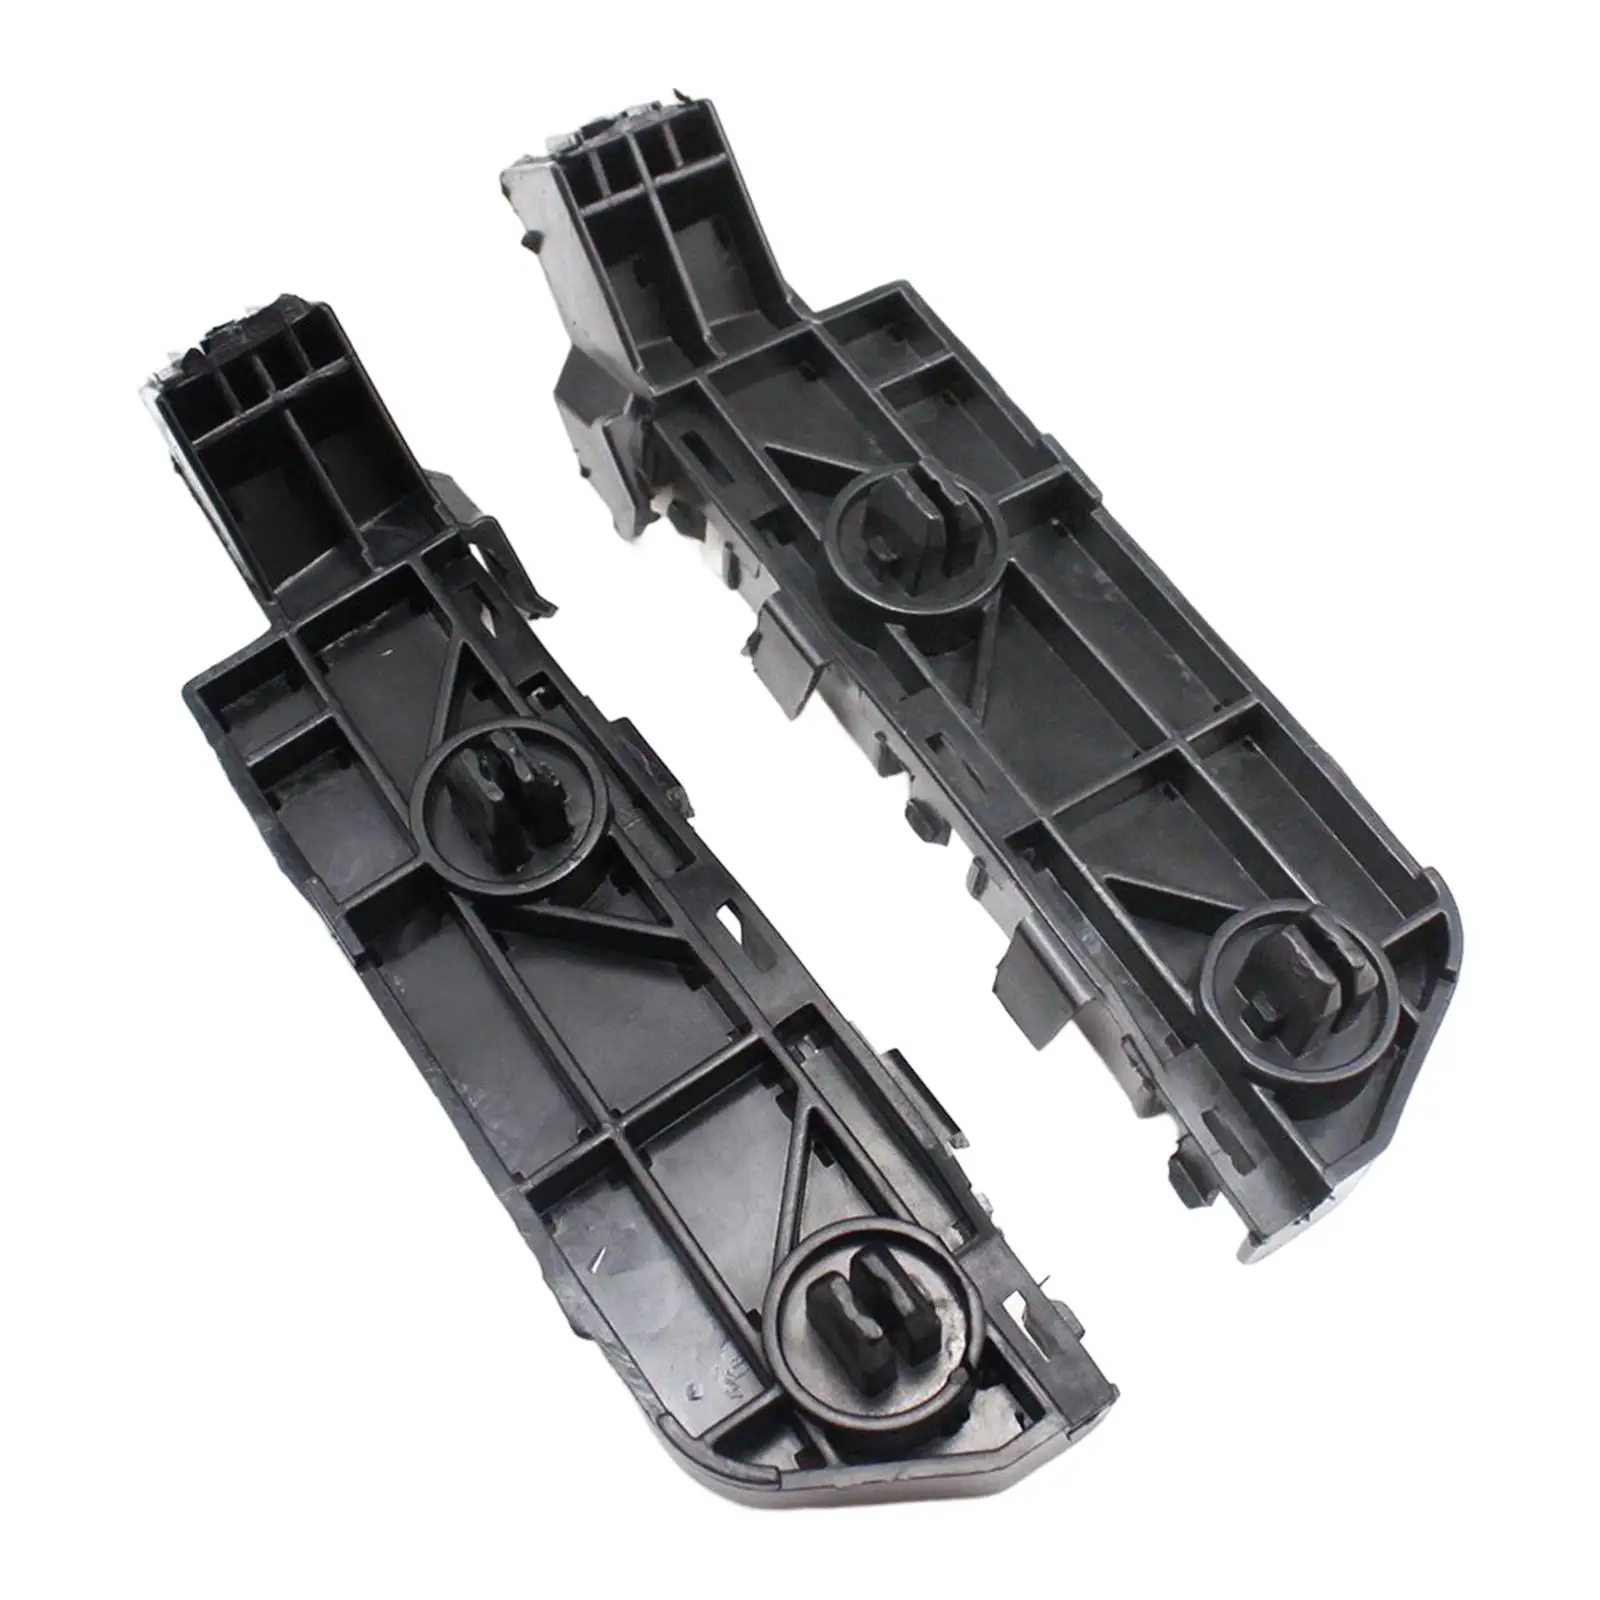 71198-swa-003 Replacement Side Beam Mount Support Front Bumper Fender Bracket for Honda CRV RE1 RE2 RE3 RE4 2007-2011